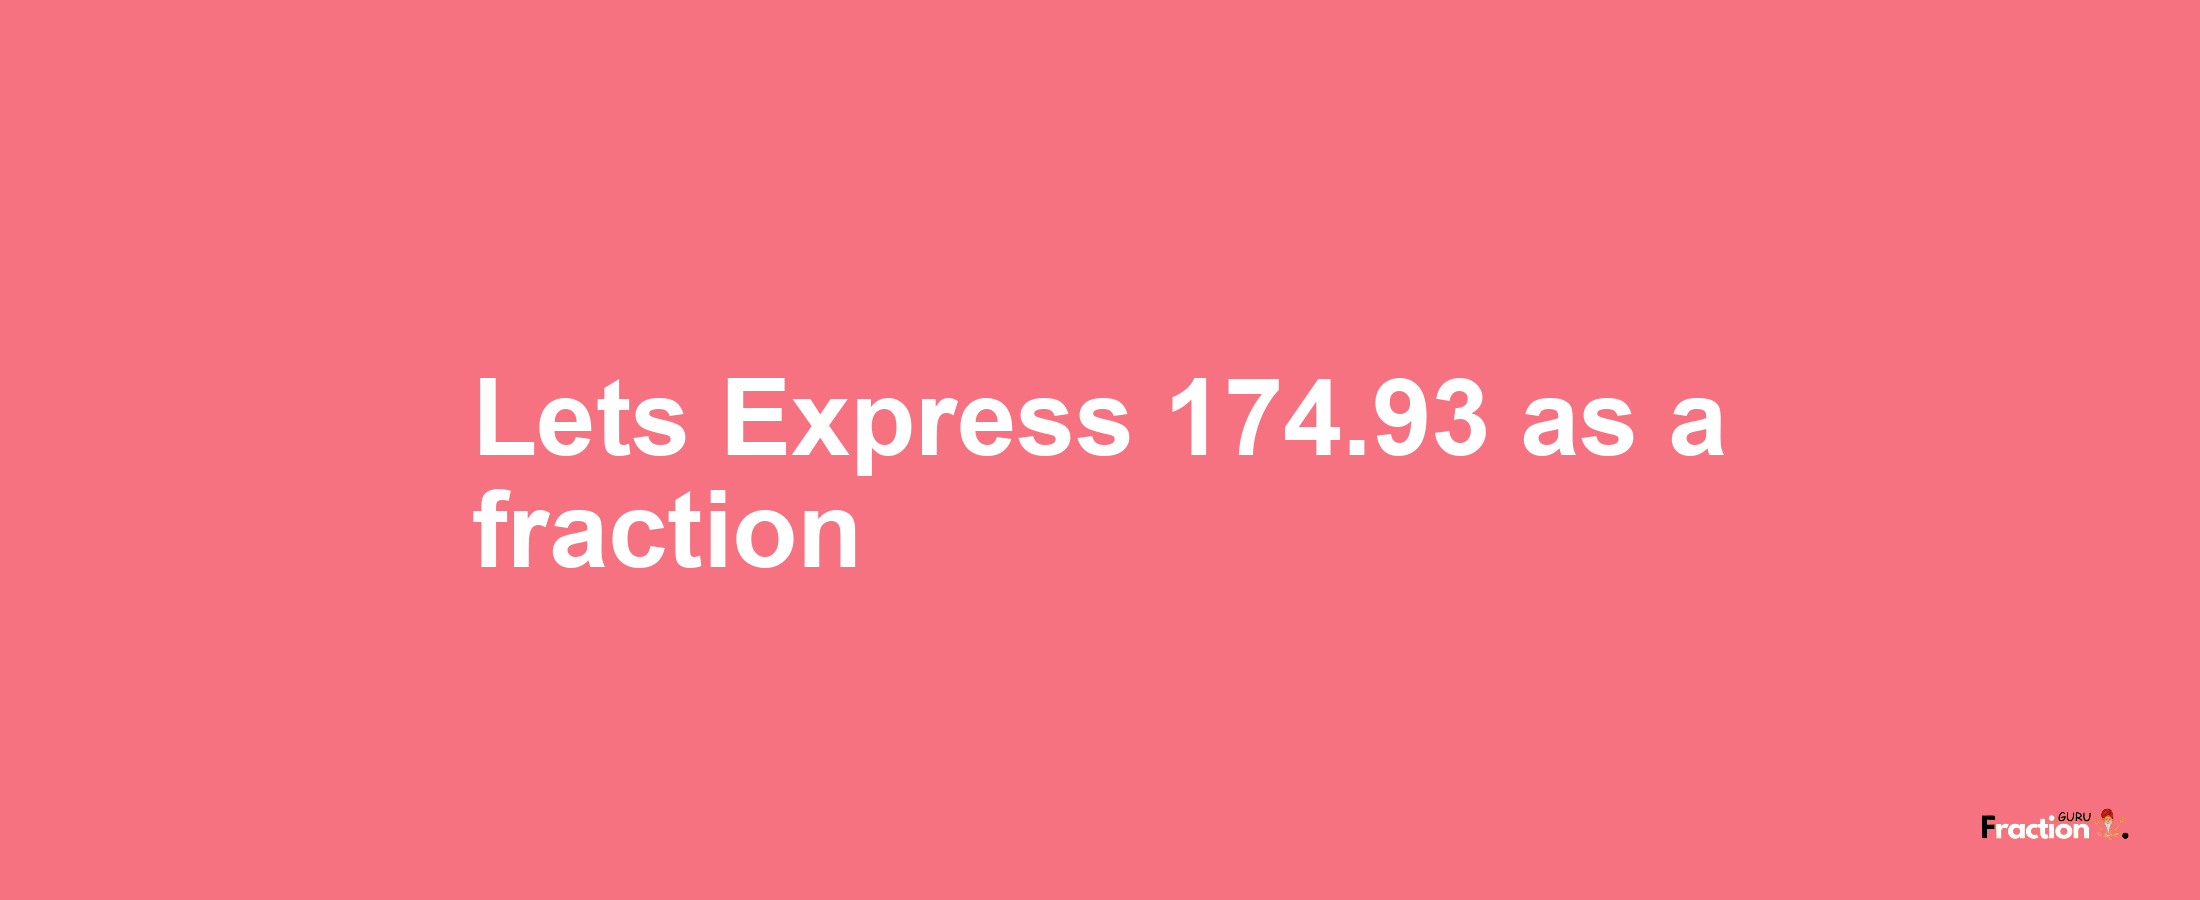 Lets Express 174.93 as afraction